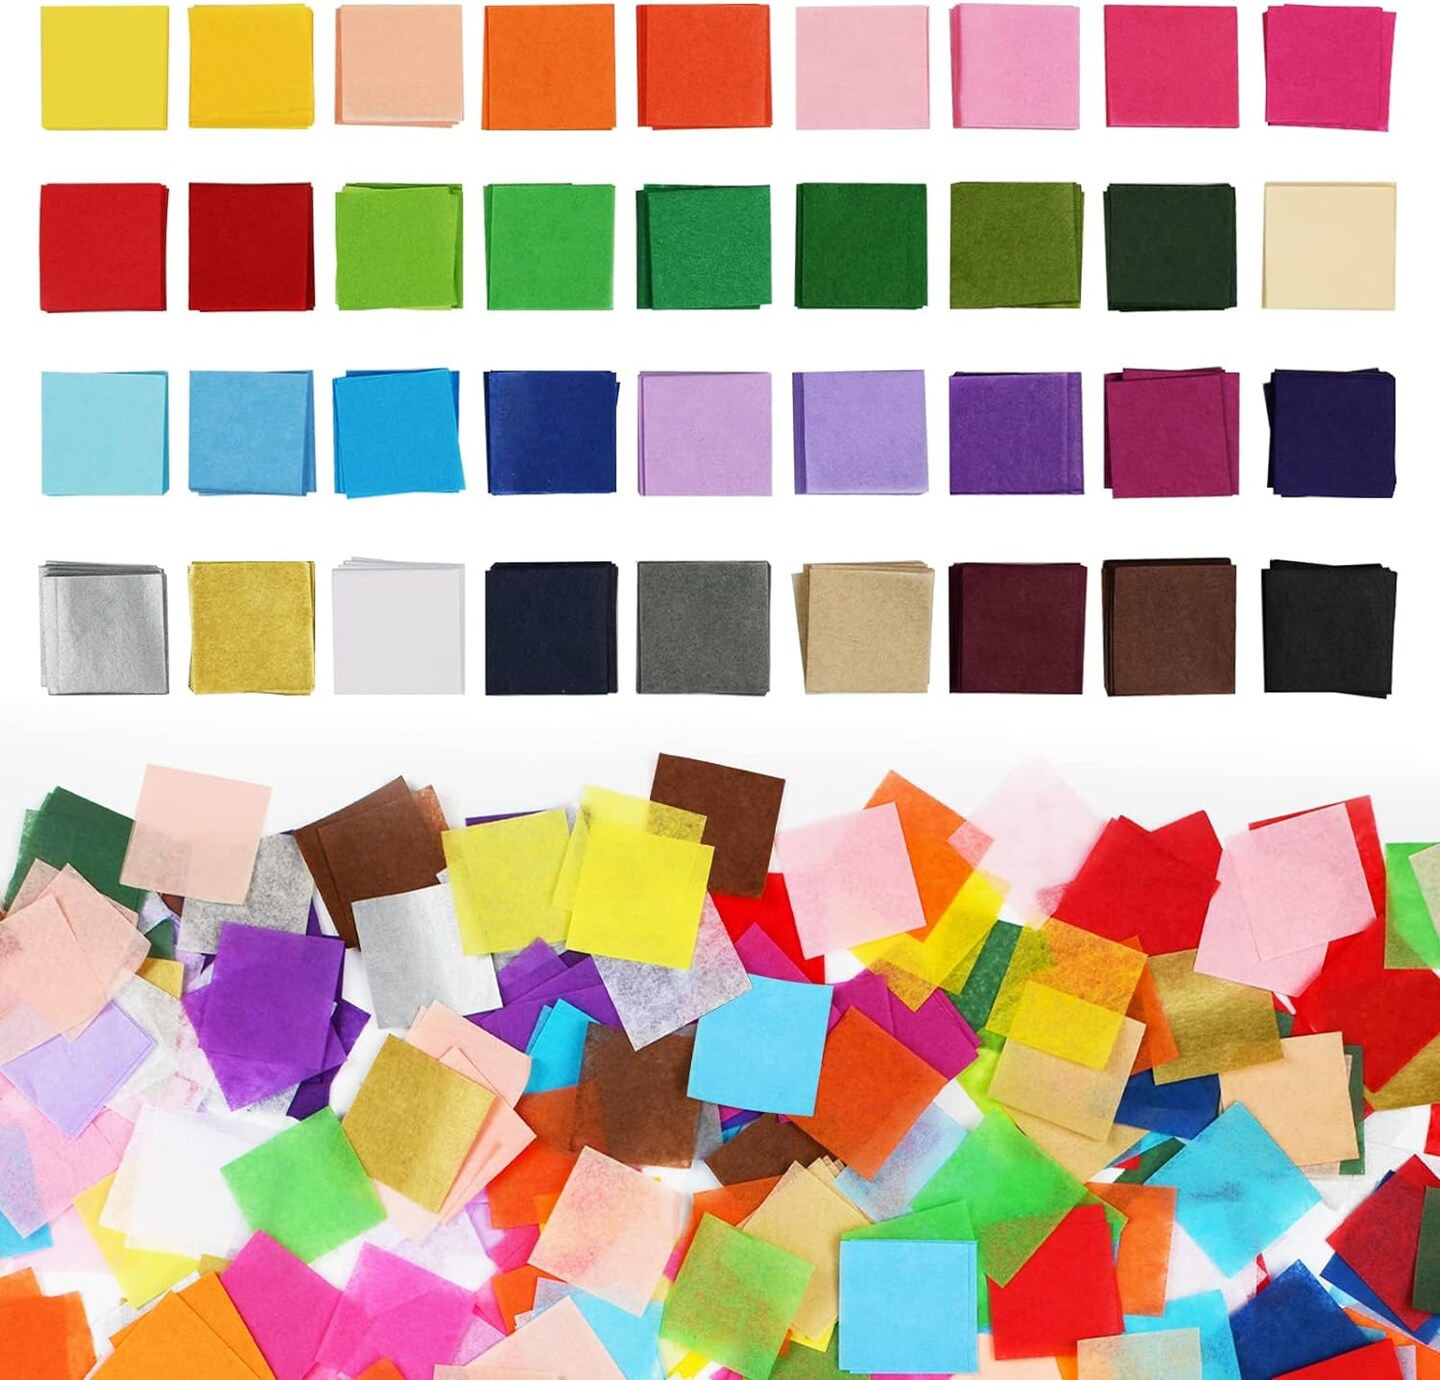 5400 Pcs 1 Inch Tissue Paper Squares, 36 Assorted Colored Tissue Paper for Crafts, Art Rainbow Tissue Paper Bulk for Art Projects, Collage, Suncatchers, Scrapbooking - Non Bleeding